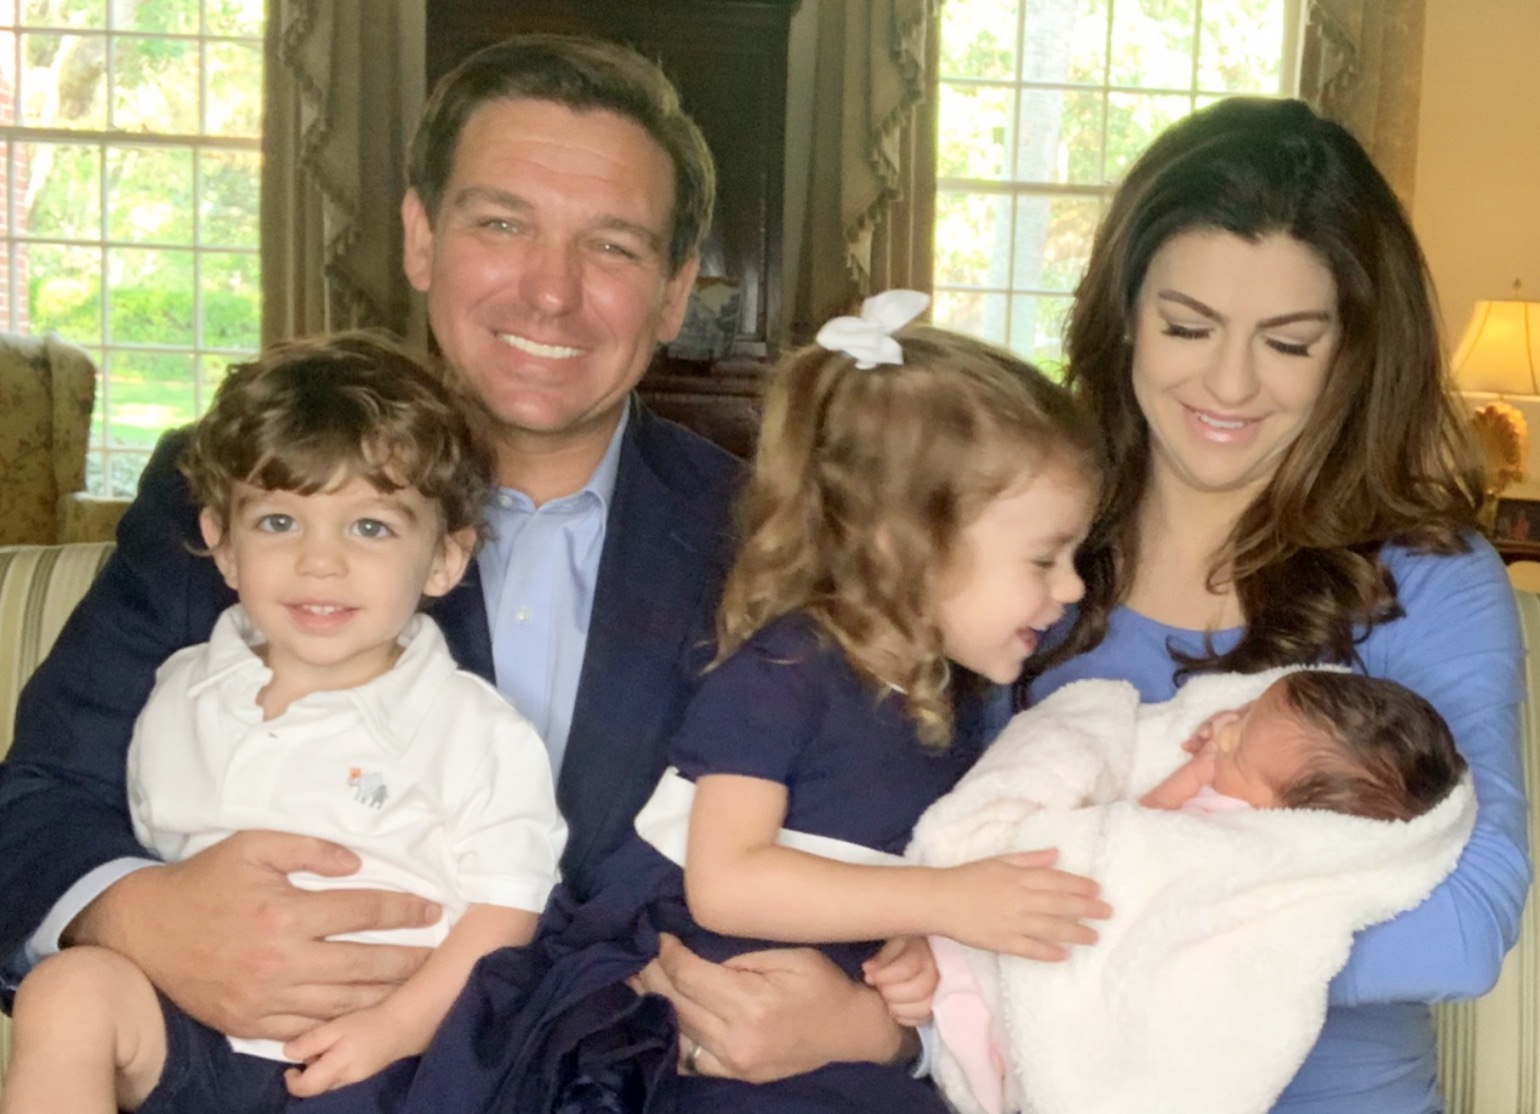 Ron and Casey DeSantis welcome baby Mamie into the world